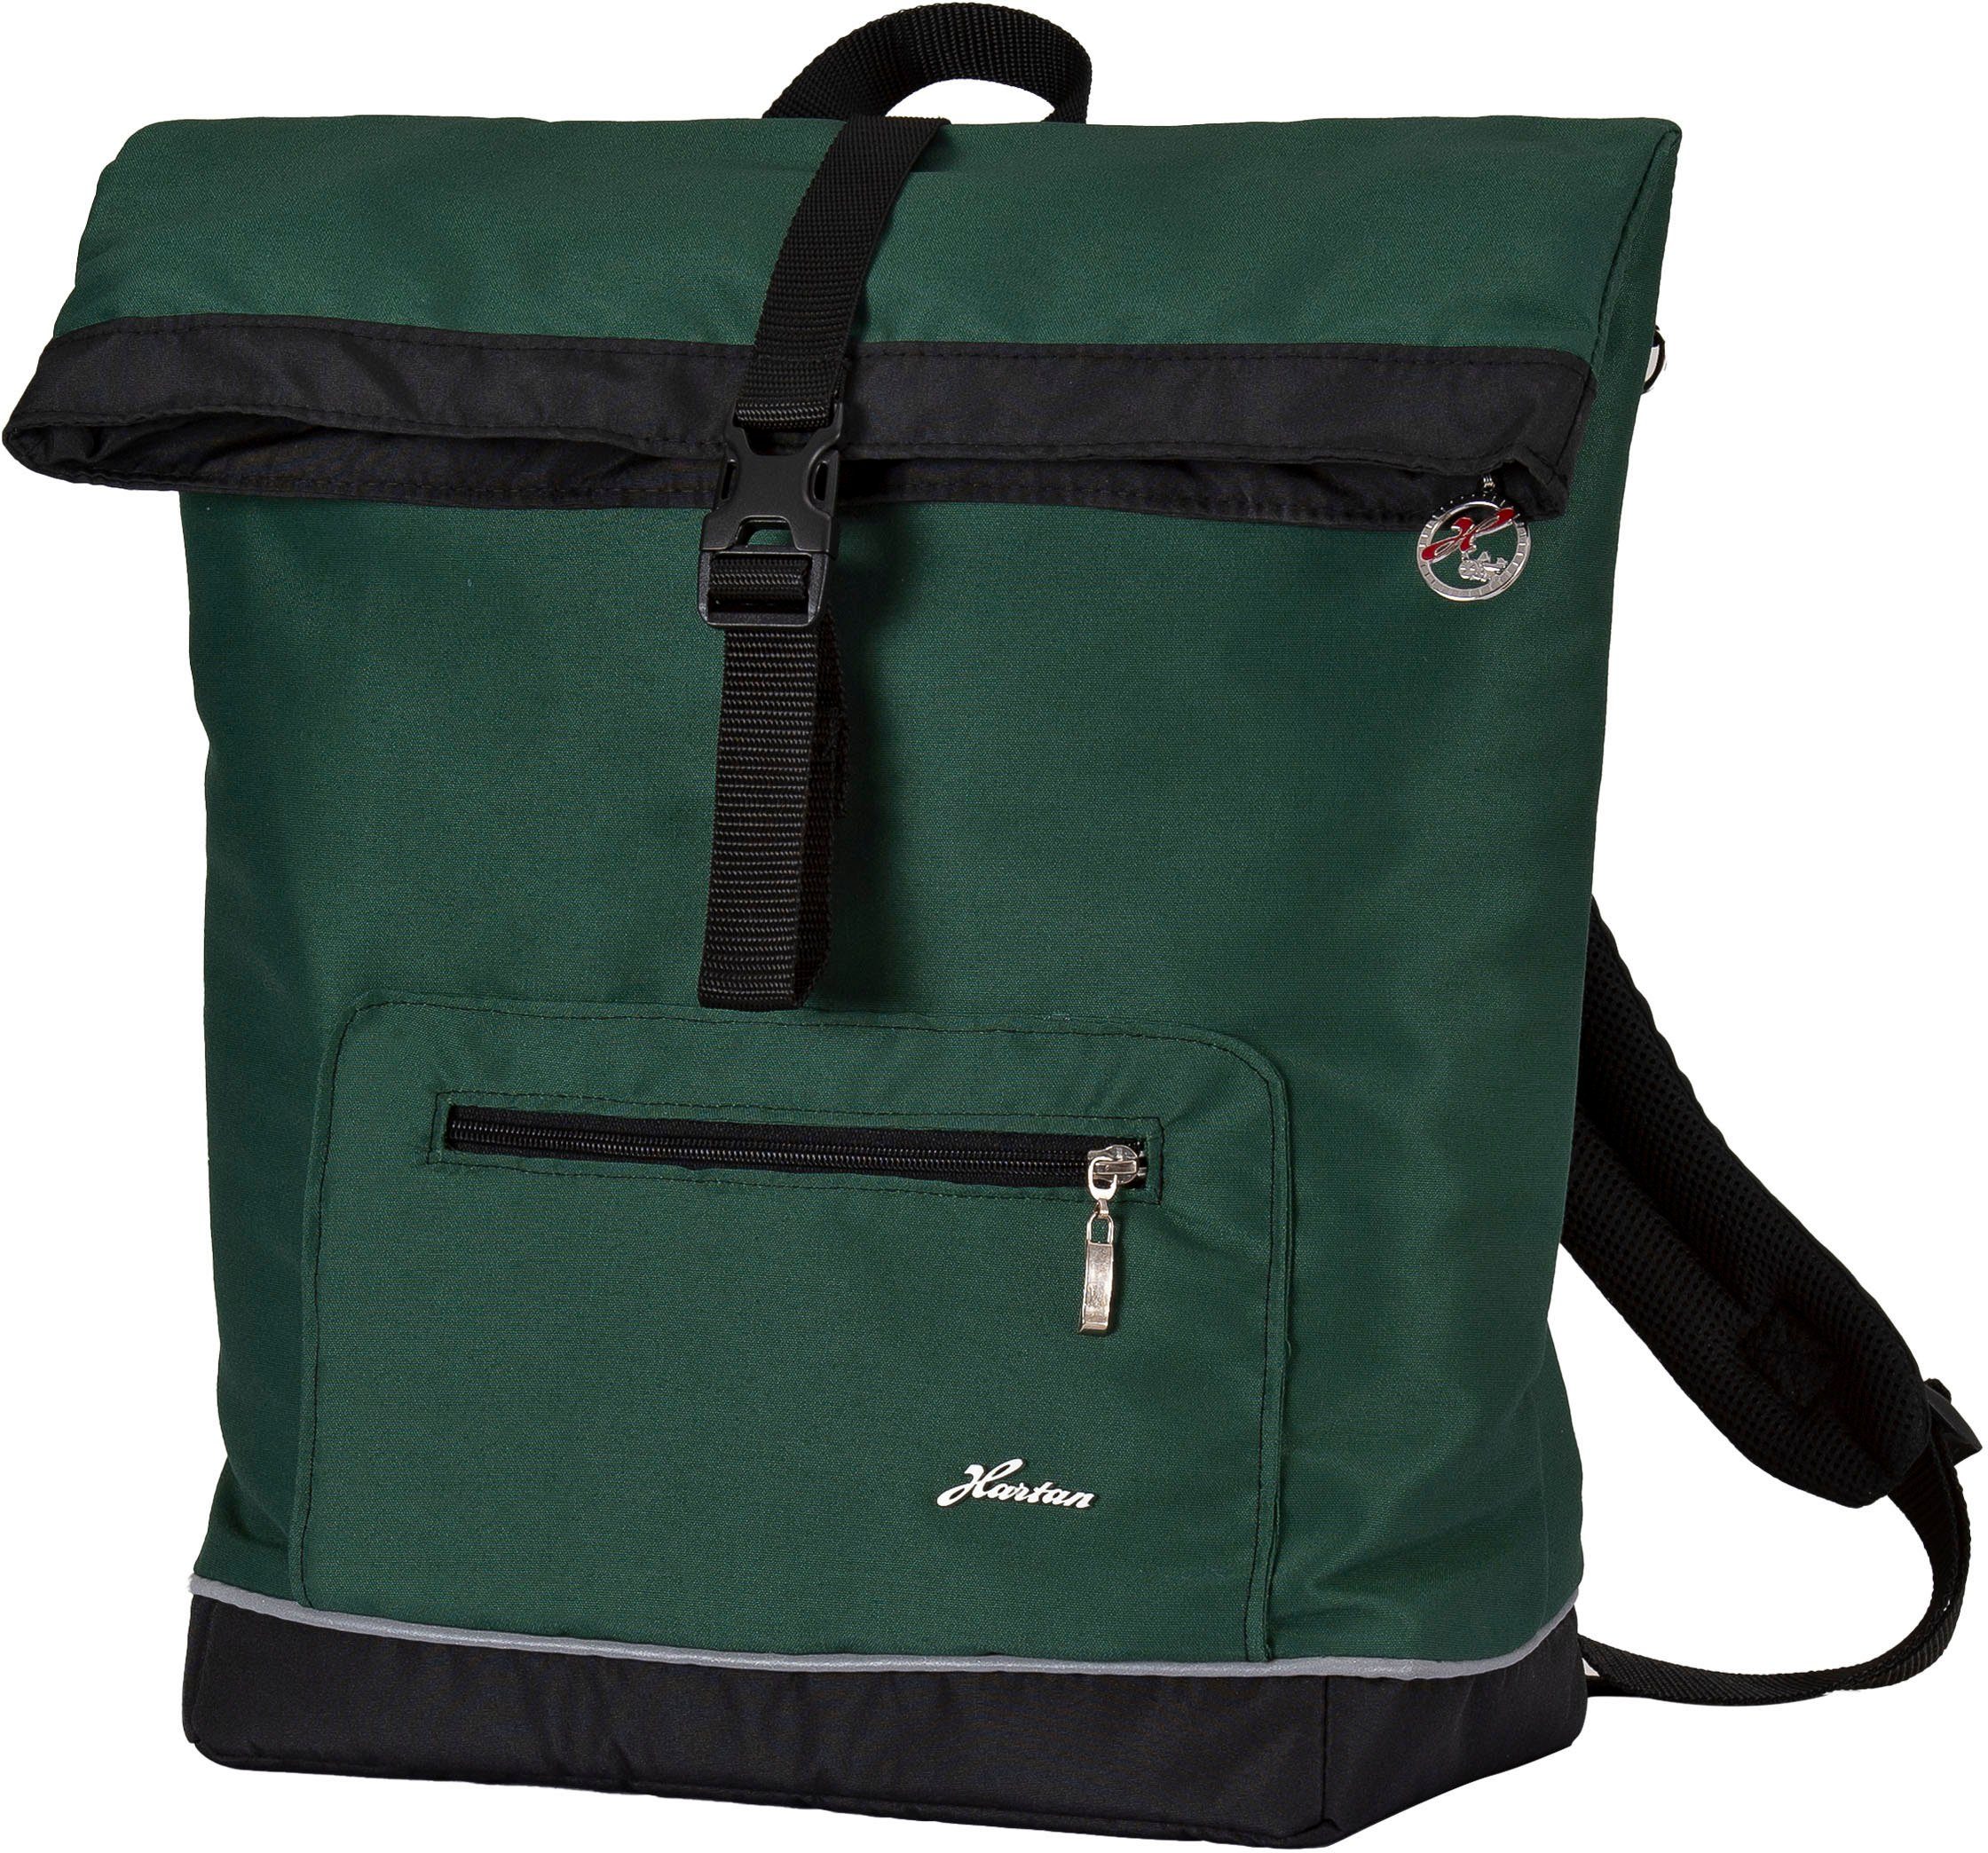 bag Thermofach; pandy Wickelrucksack mit Space - Collection, Made in Casual Germany family Hartan